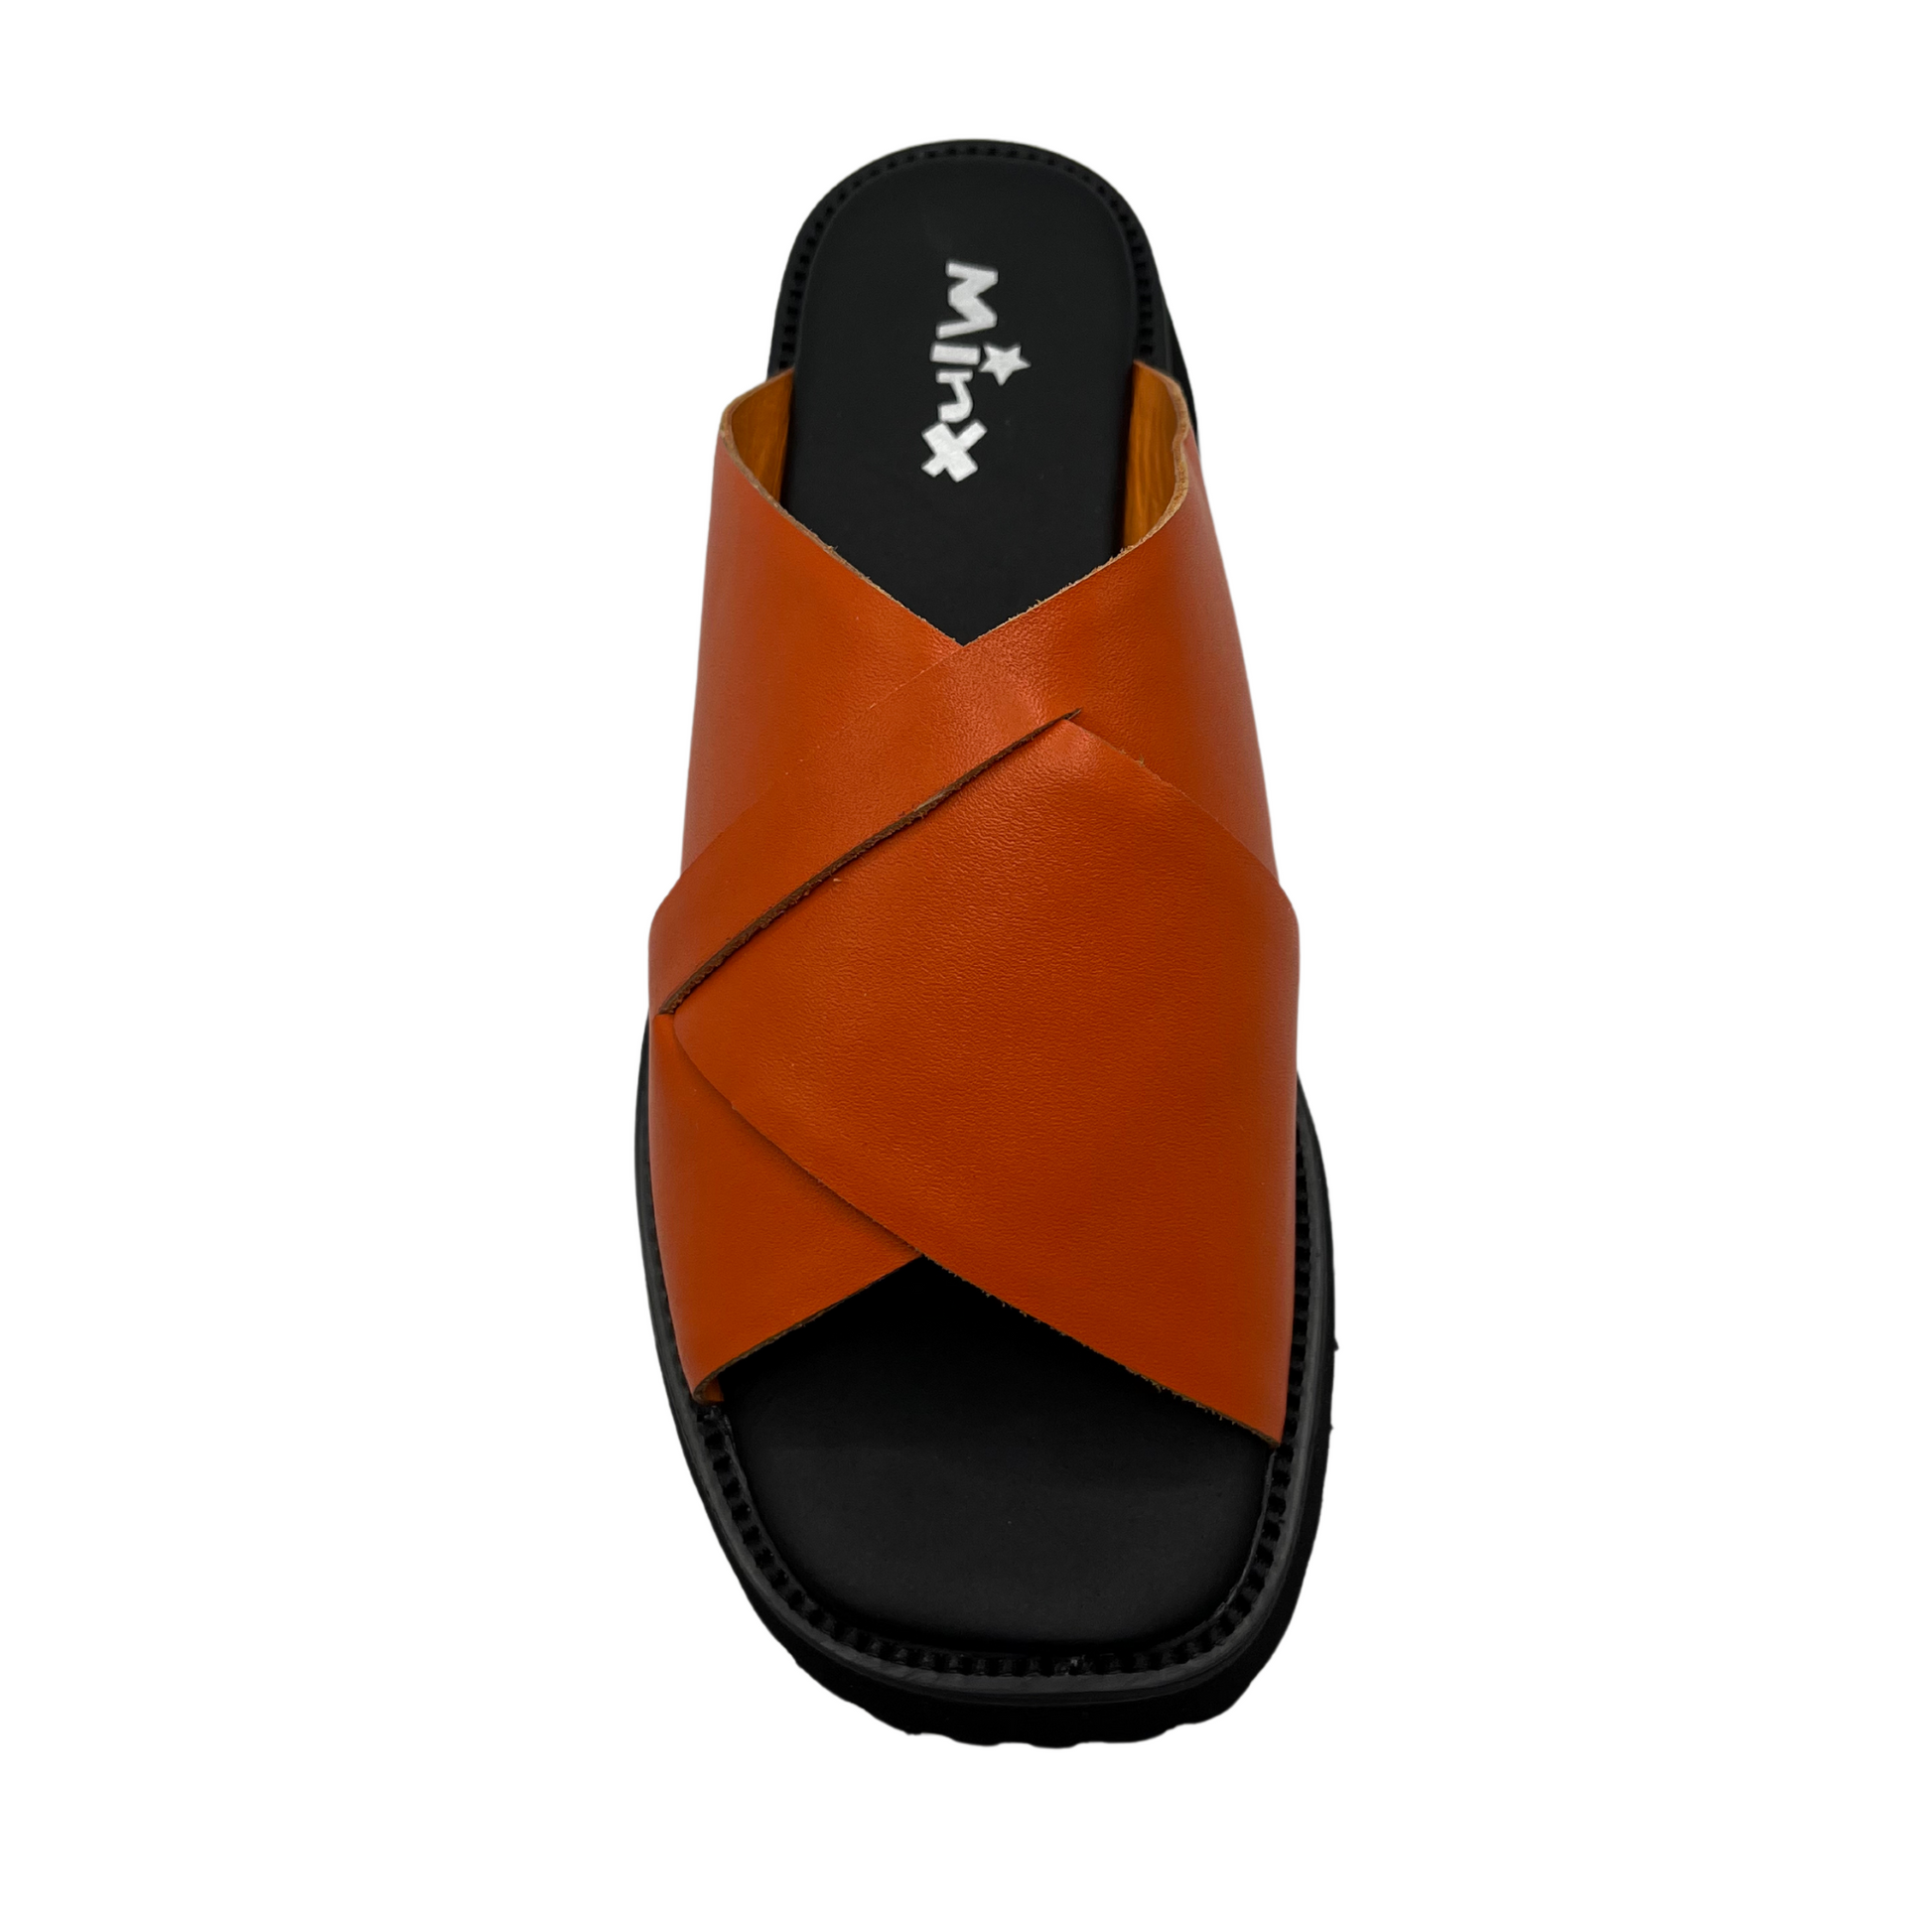 Top view of orange leather sandal with thick black sole, cross over straps and open toe